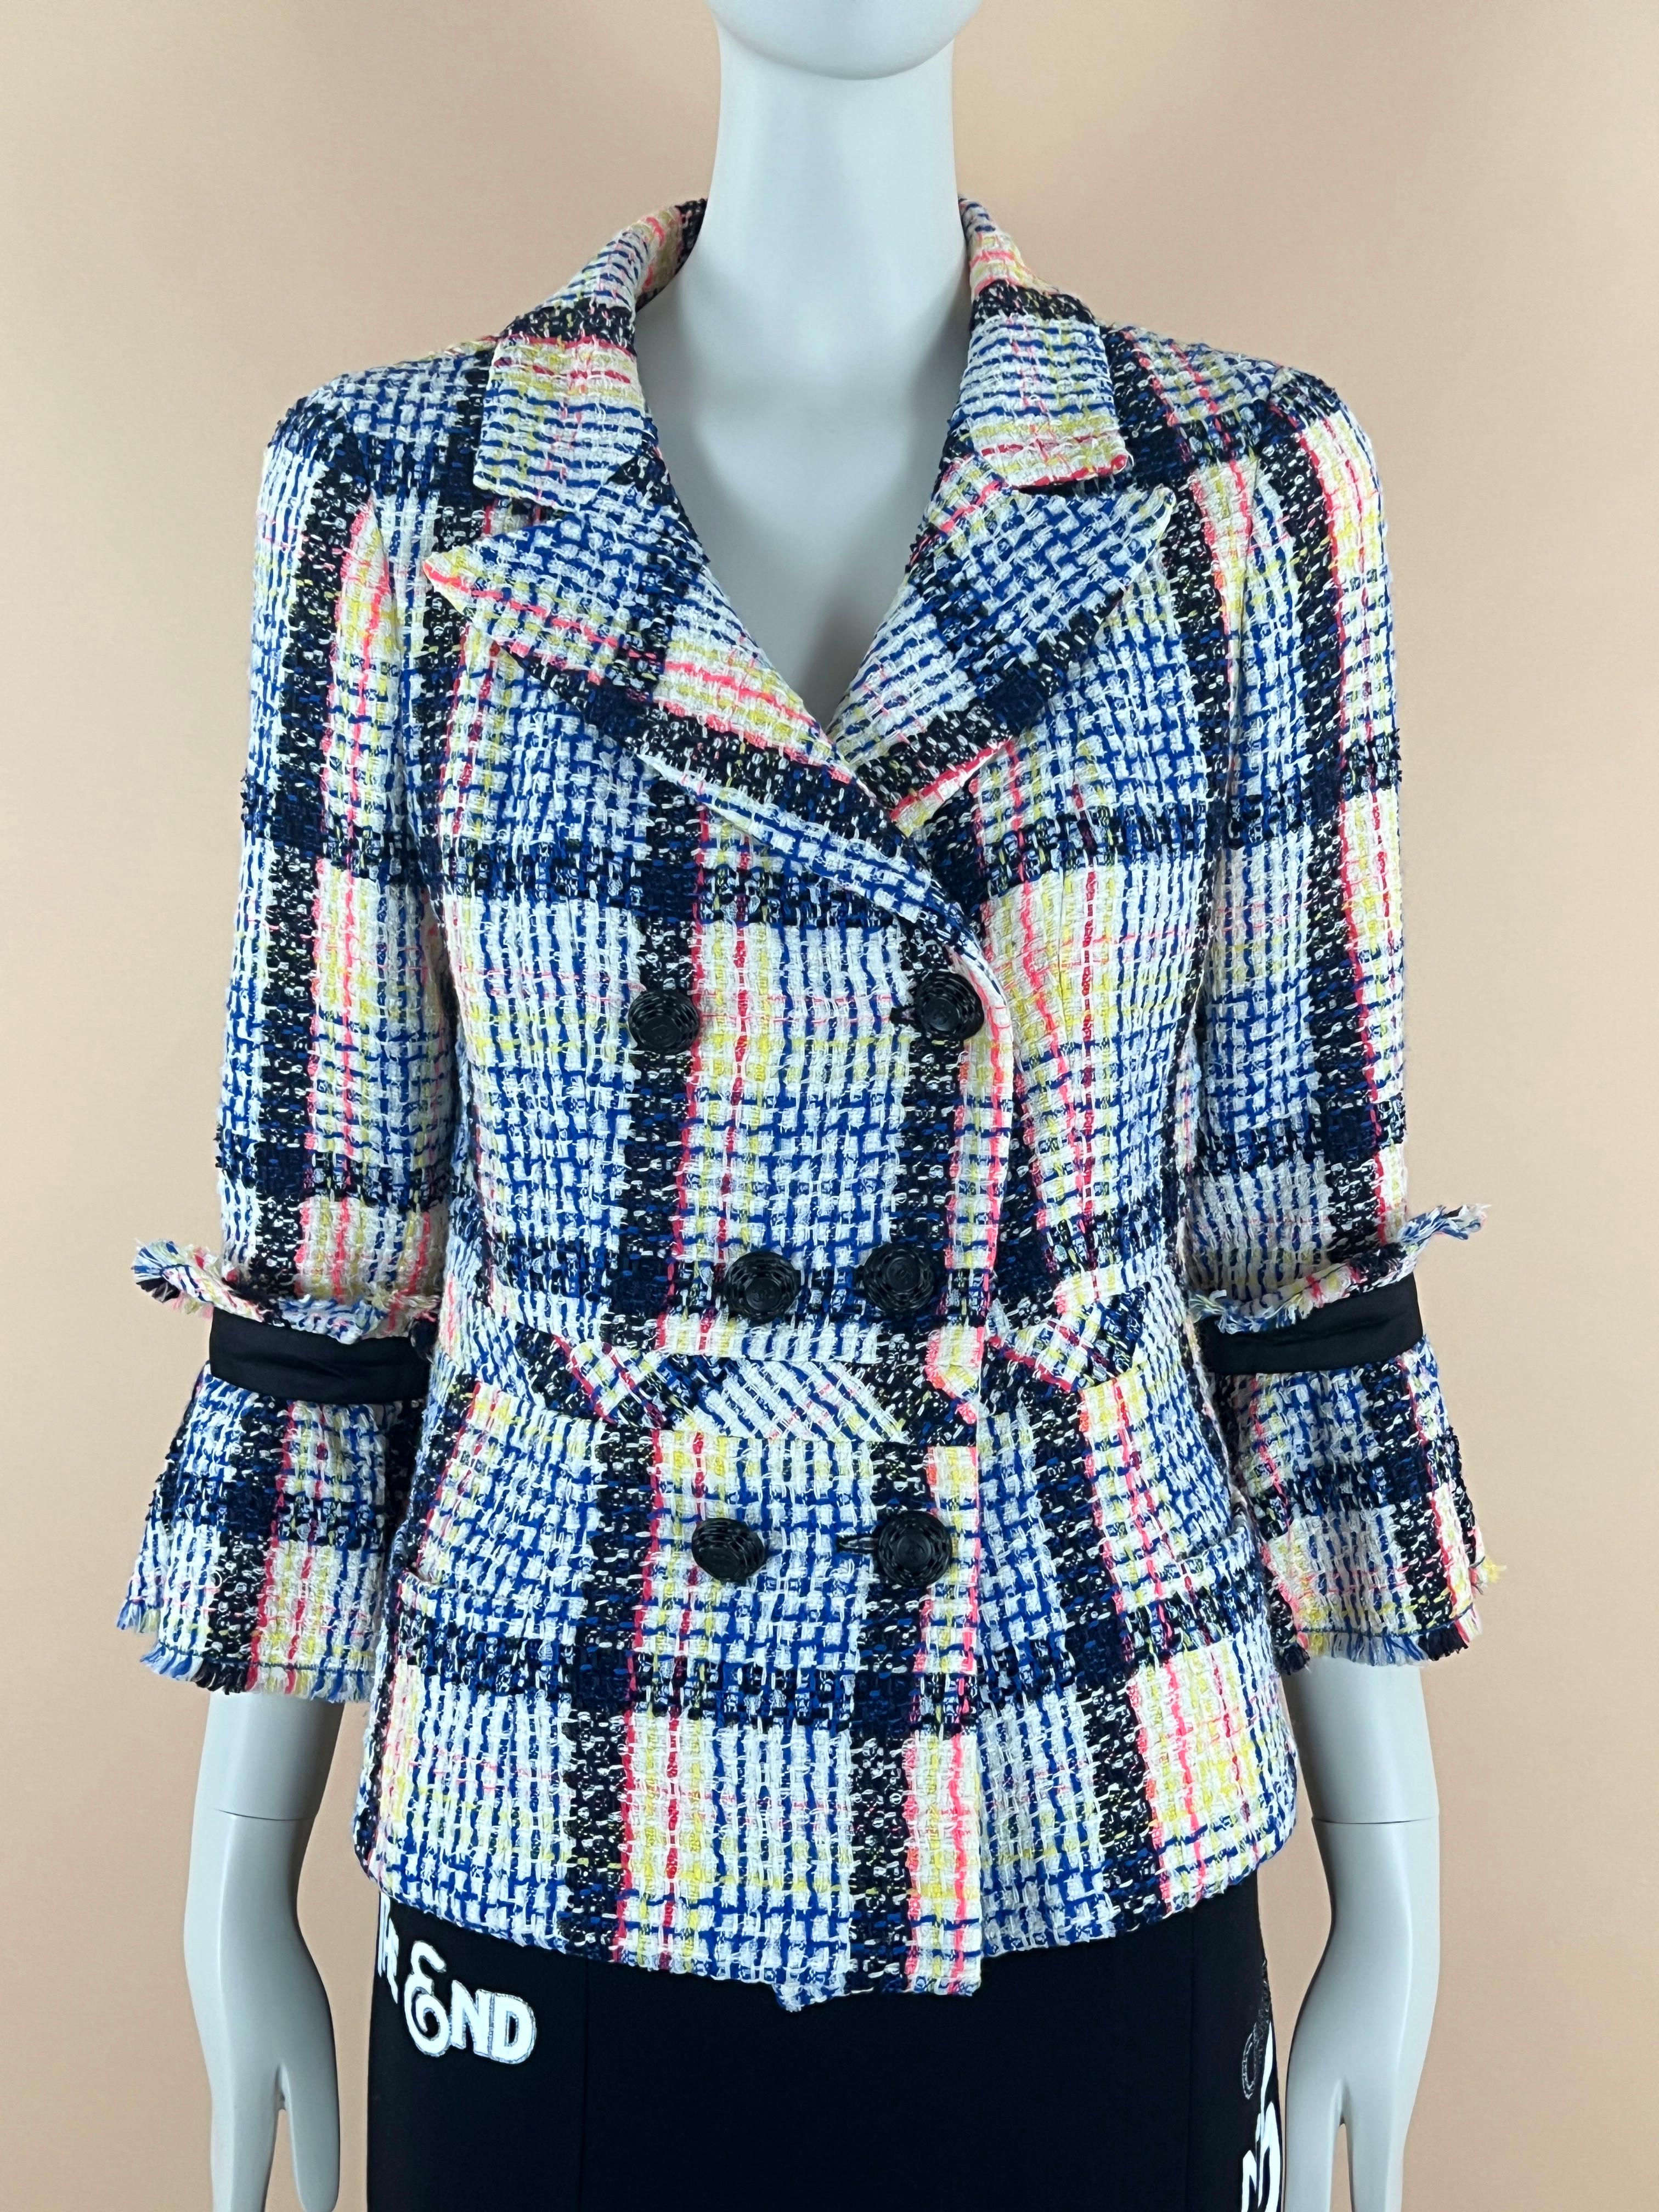 Chanel Signature Bow Detail Tweed Jacket 2